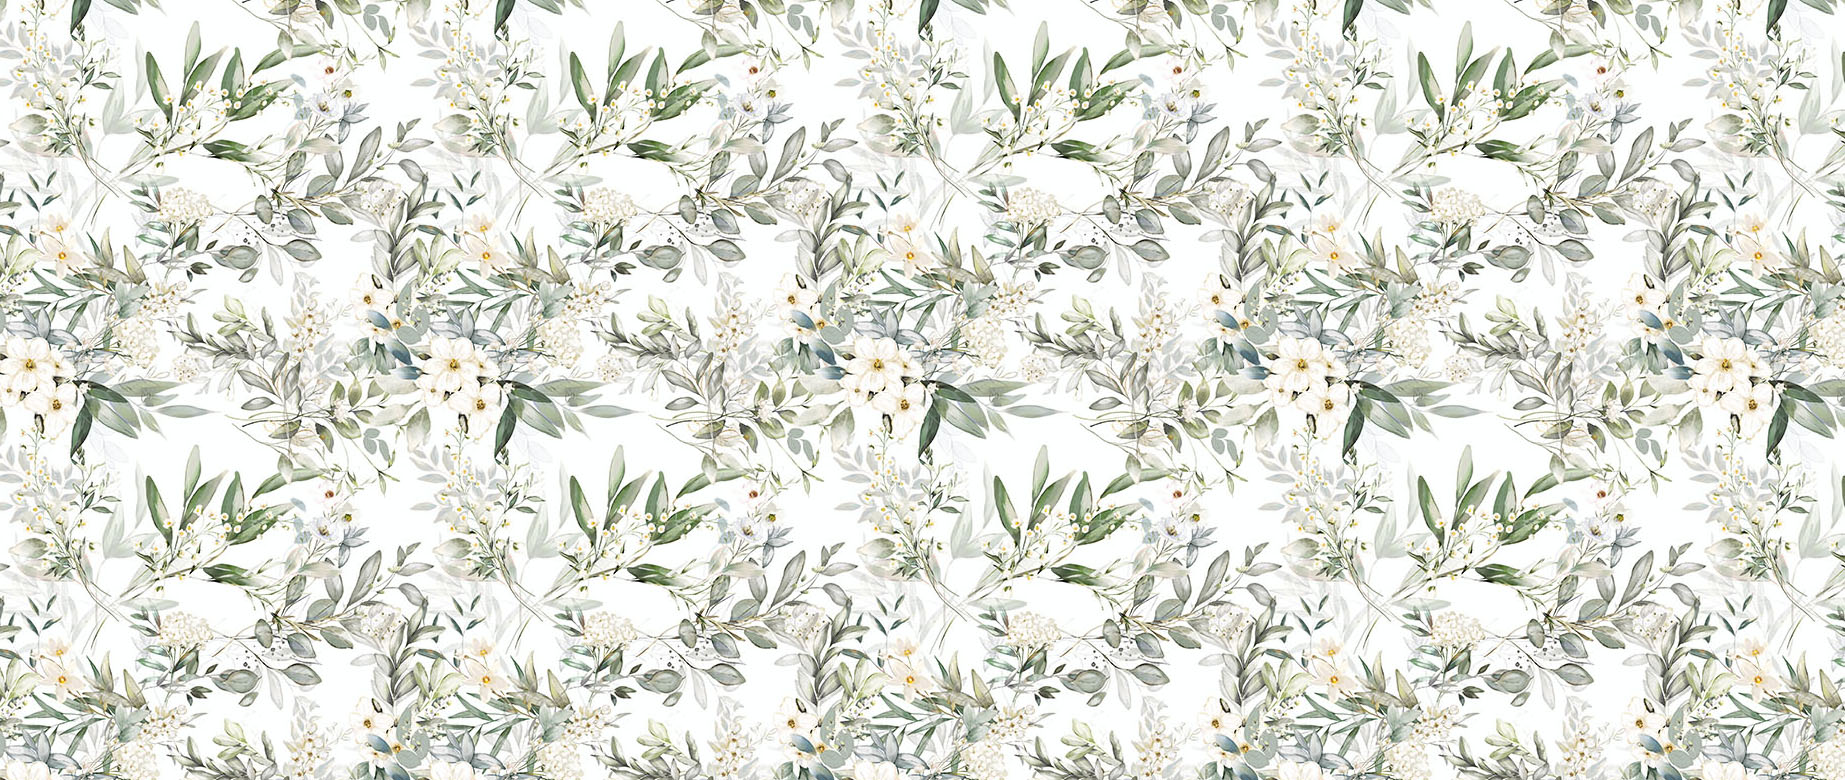 green-leaves-white-flowers-bunch-wallpaper-seamless-repeat-view